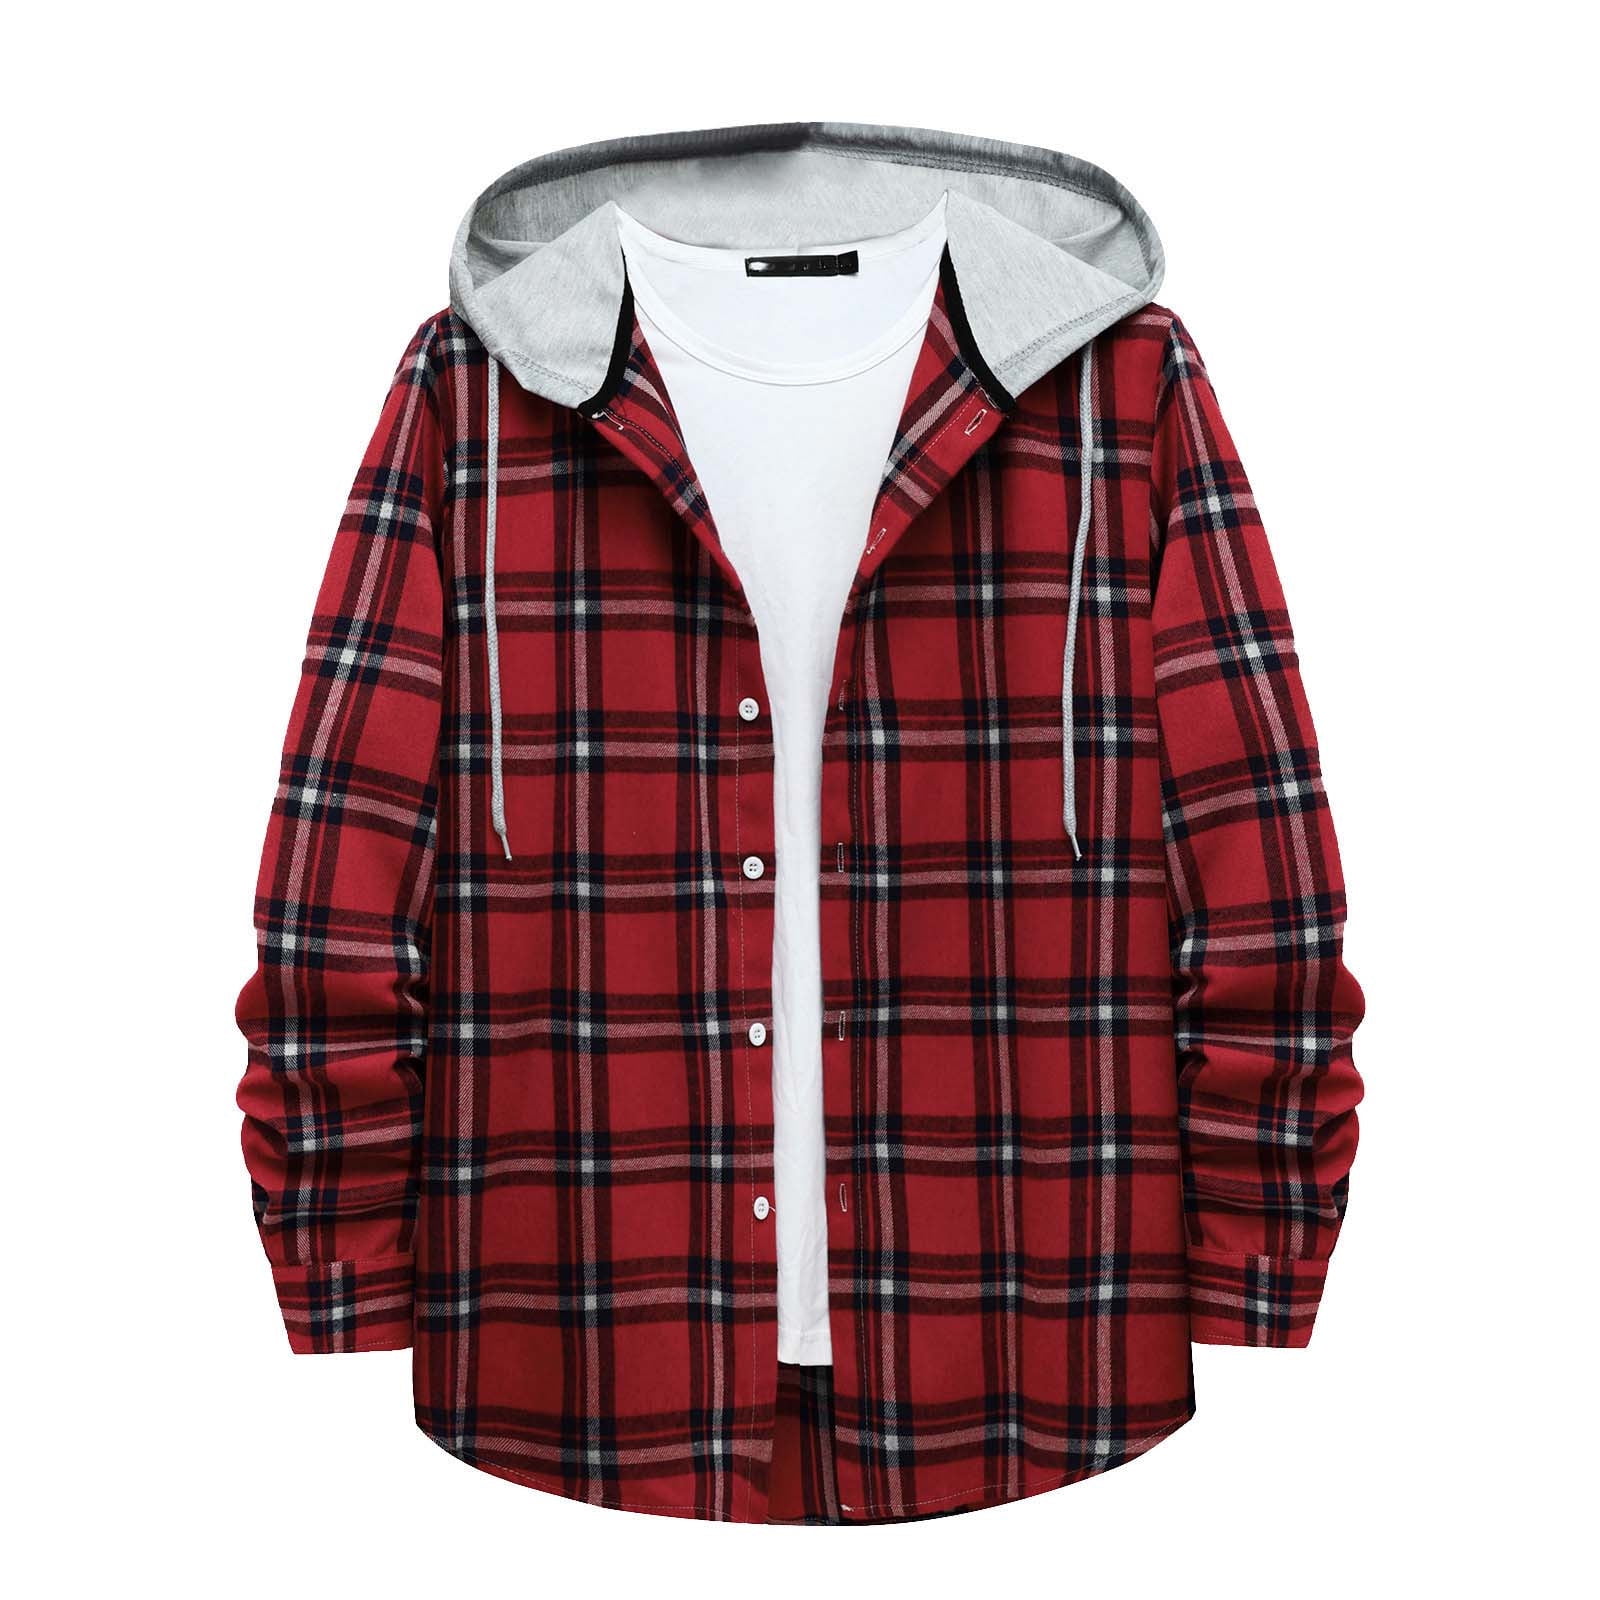 ZCFZJW Men's Casual Plaid Flannel Jacket with Hoodie Lightweight Fall ...